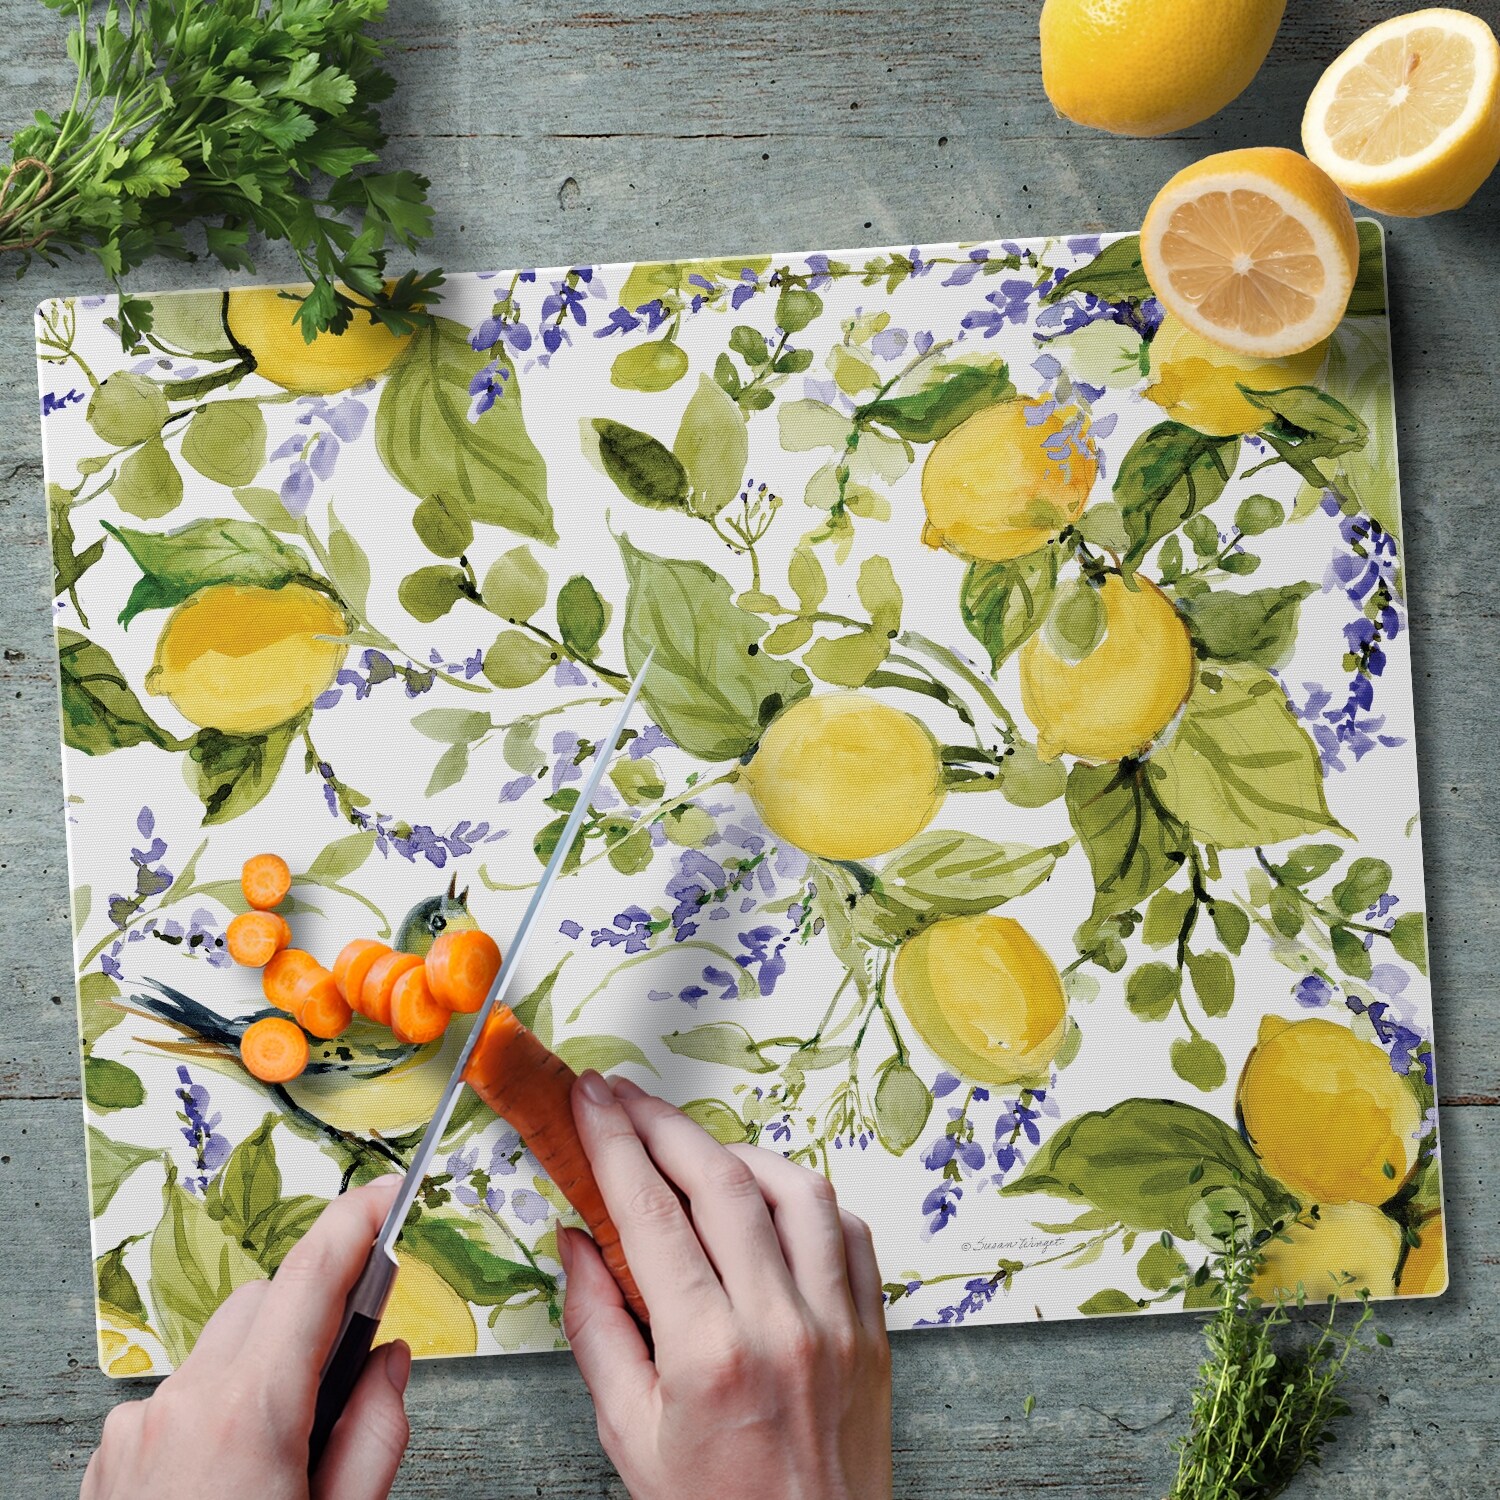 https://ak1.ostkcdn.com/images/products/is/images/direct/38fb0a2853fe9f98db62edc40e8edf2ae71d9d51/Tempered-Glass-Counter-Saver---Cutting-Board-Watercolor-Lemons---15%22-x-12%22.jpg